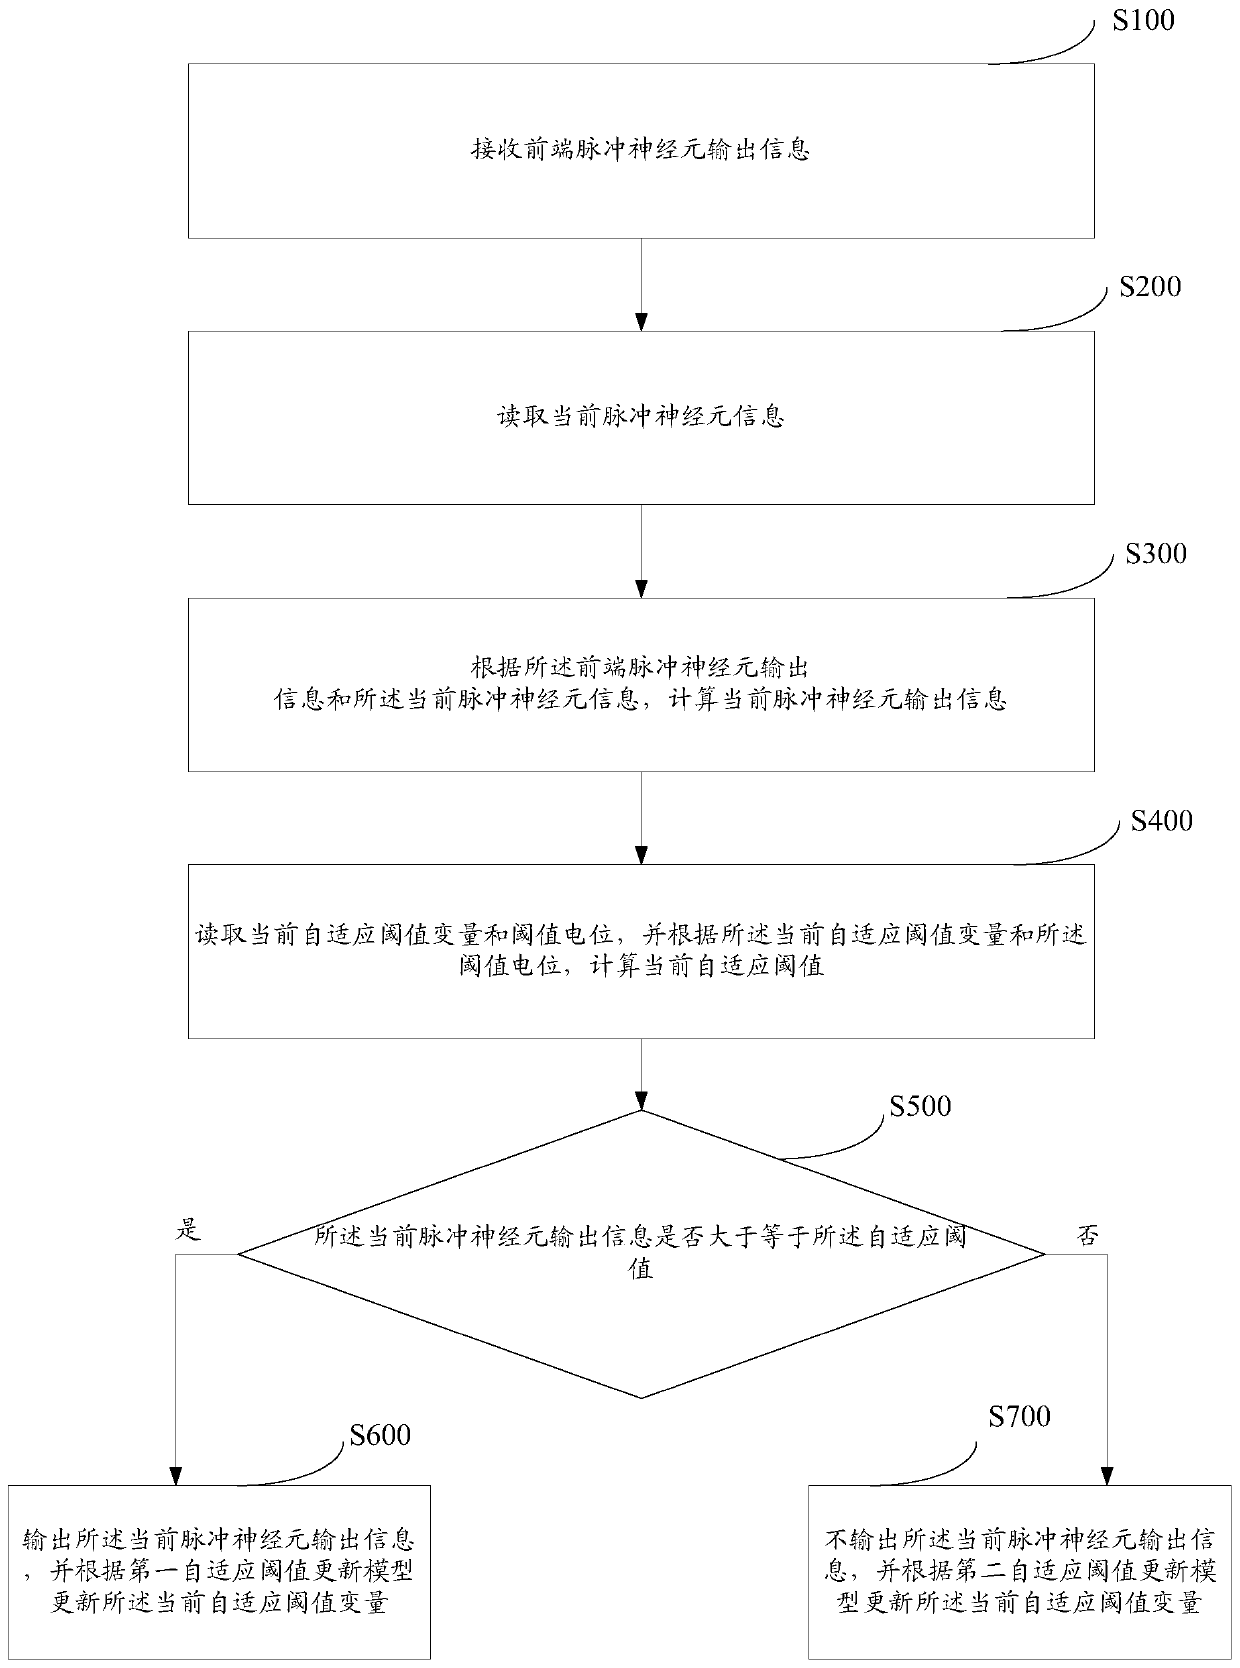 Adaptive threshold neuron information processing method and system